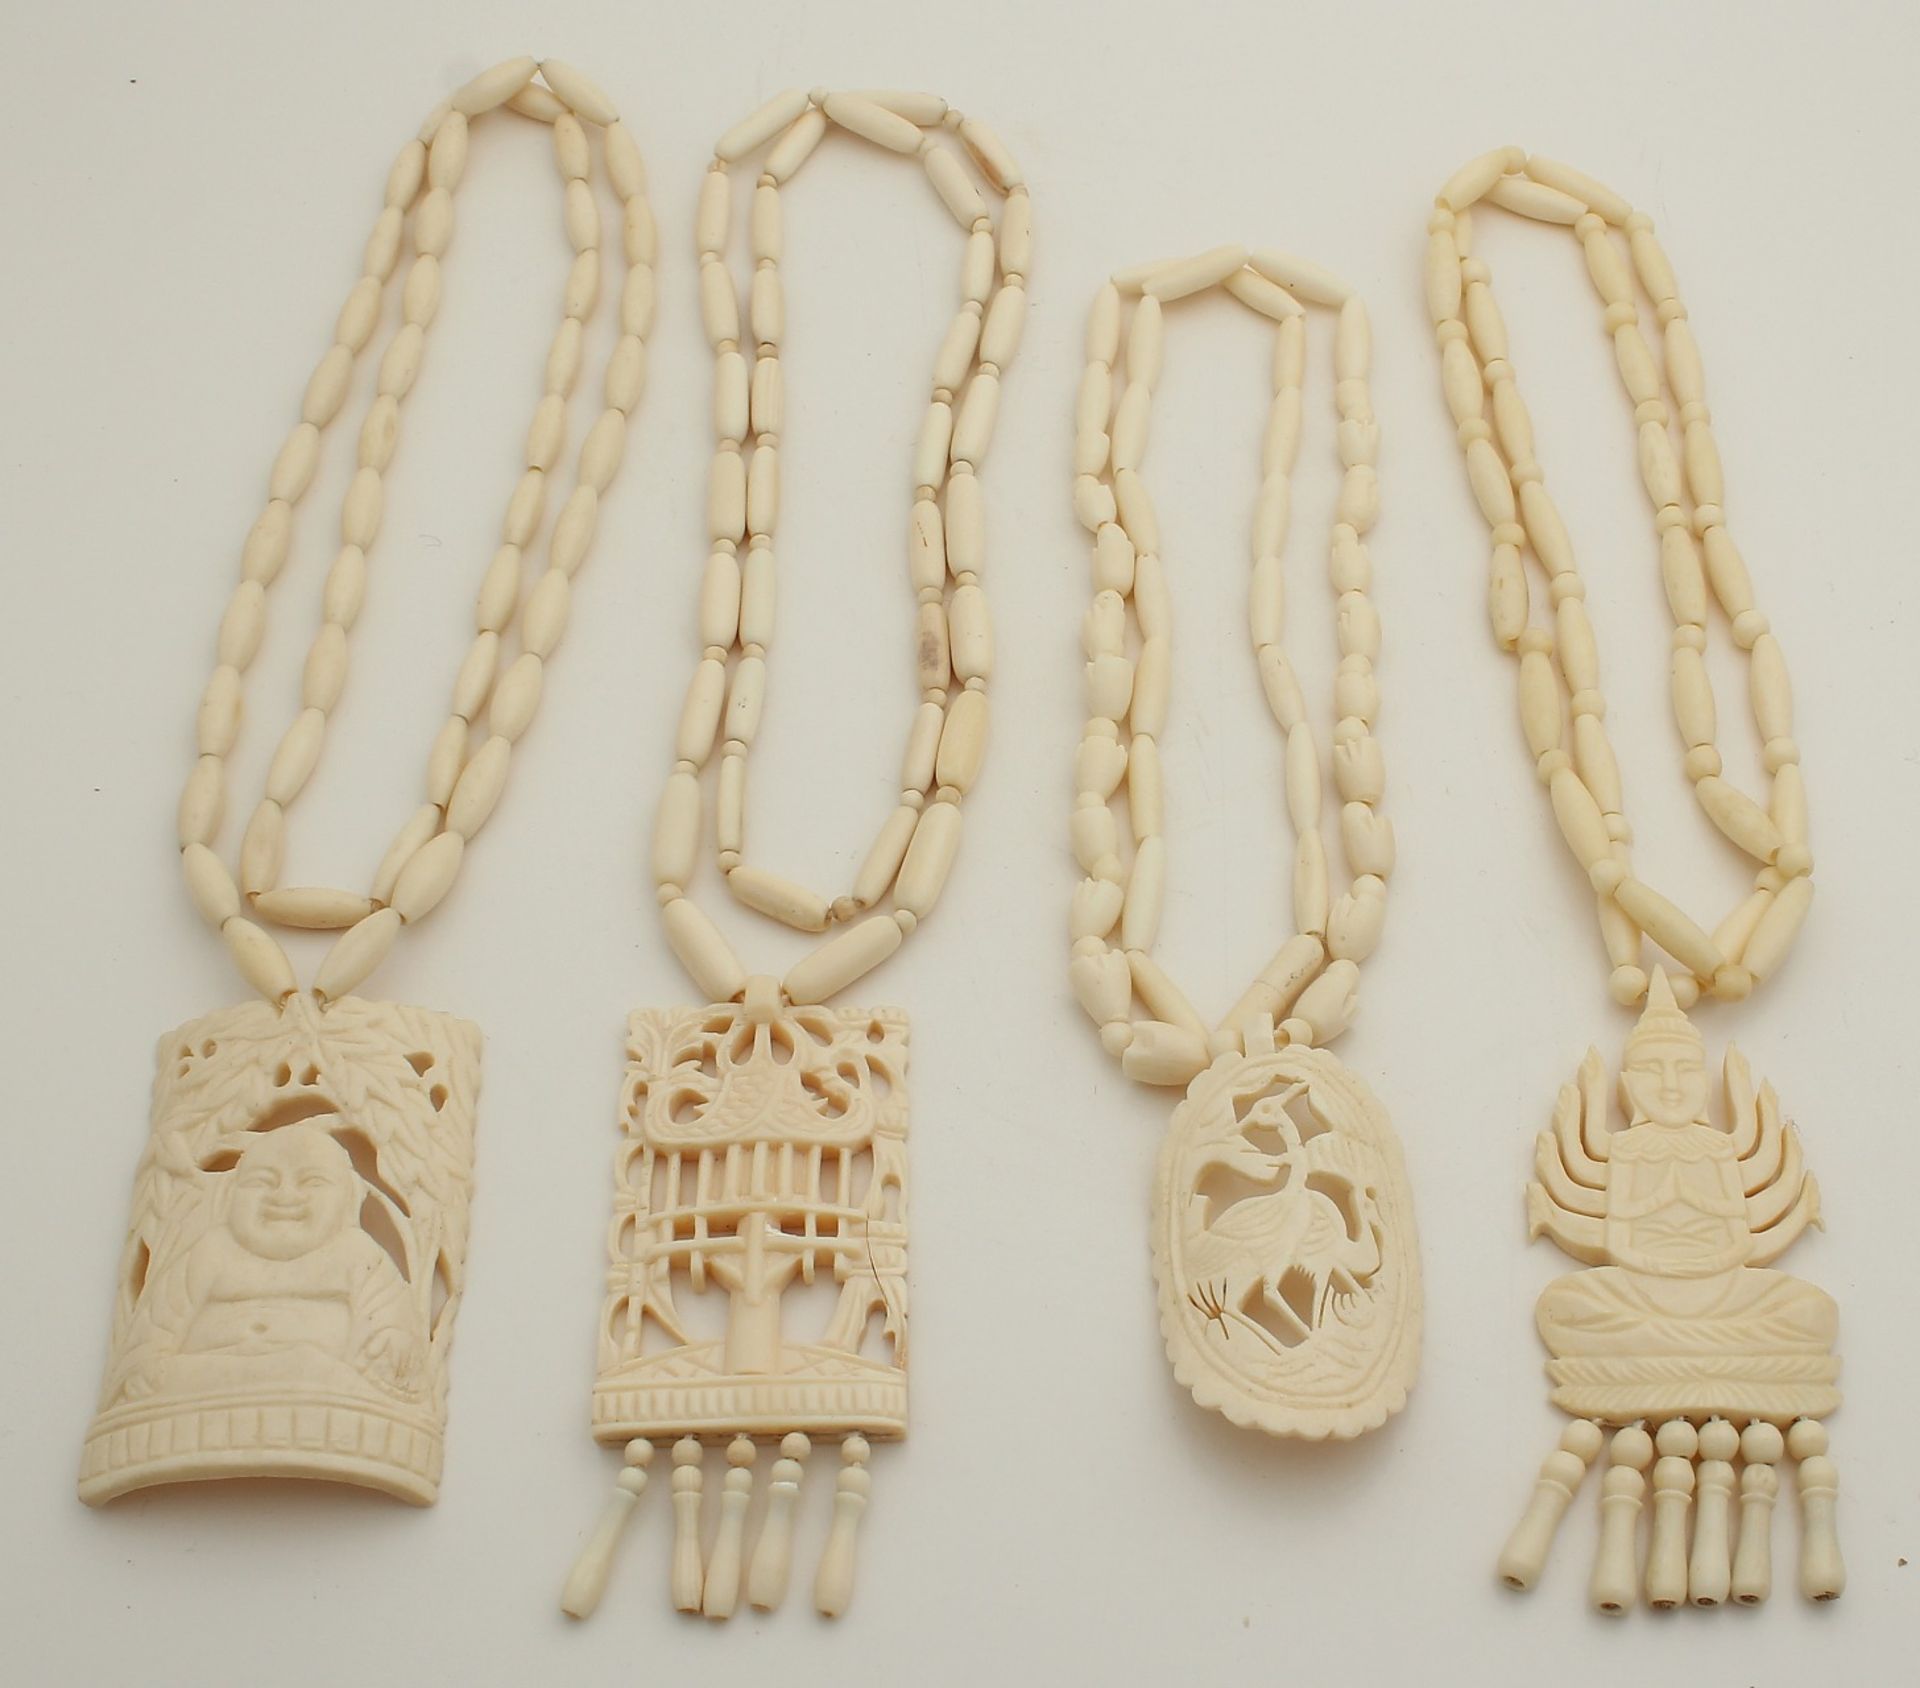 Lot jewelery with ivory, consisting of four ivory necklaces with marquis-shaped links with large